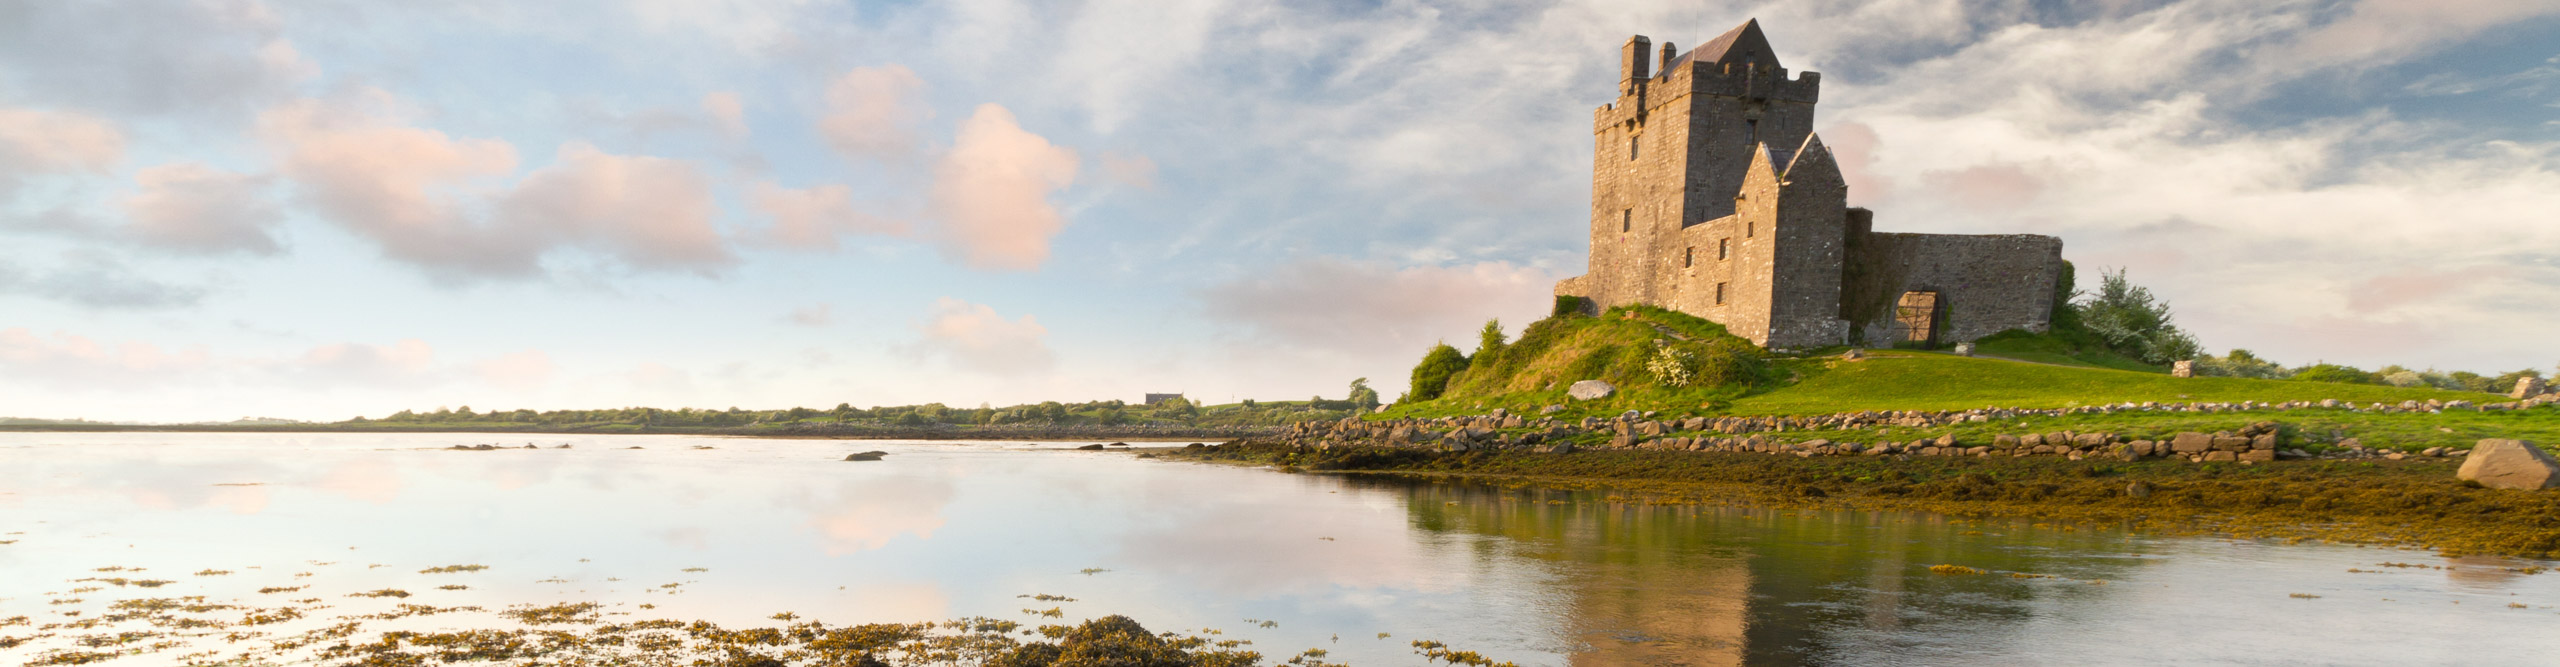 Dunguaire castle at sunset, reflected in the water, near Galway, Ireland